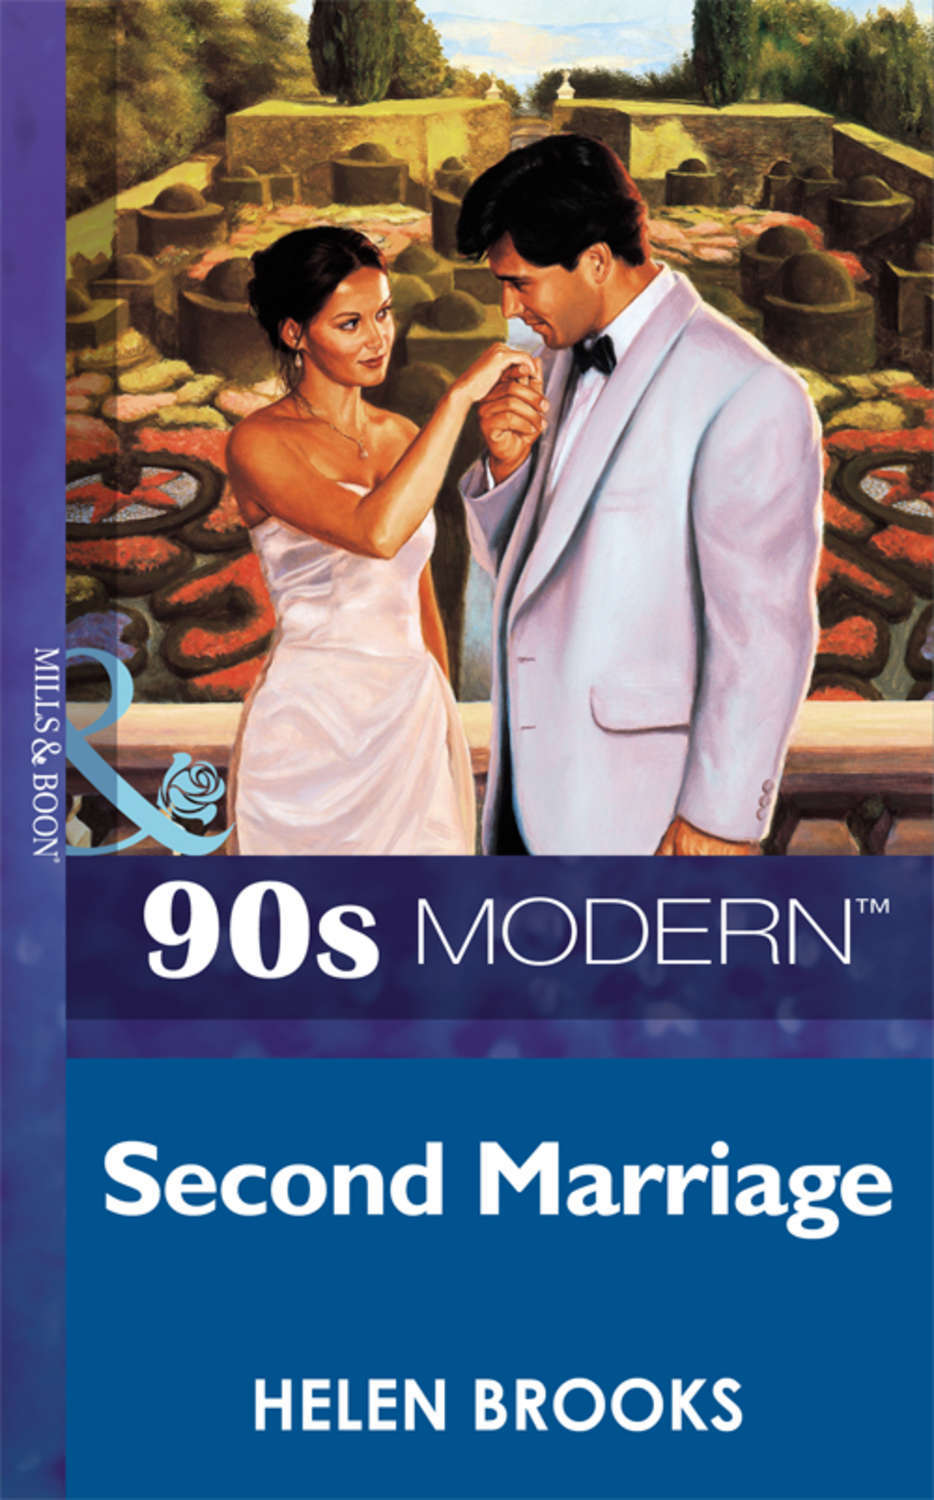 Second marriage. Marriage книга. Брукс Хелен игра. Modern marriage book.